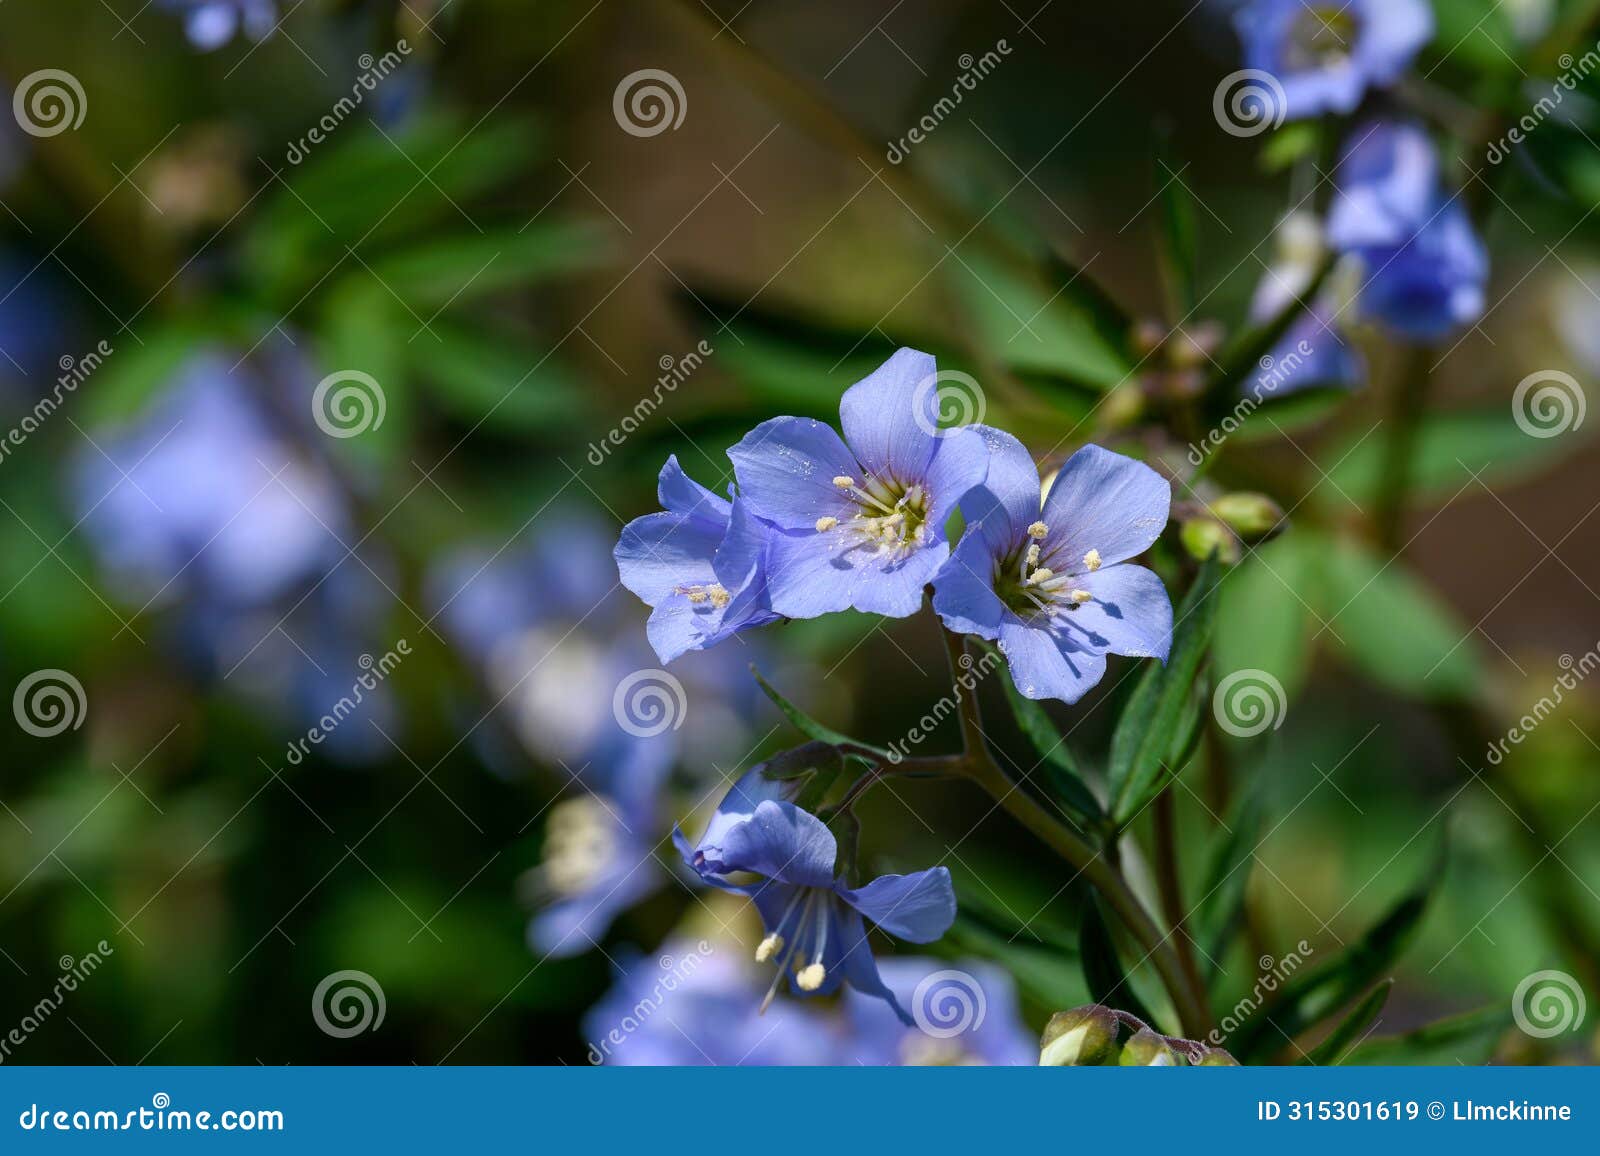 jacobs ladder flowers with a blurred background.